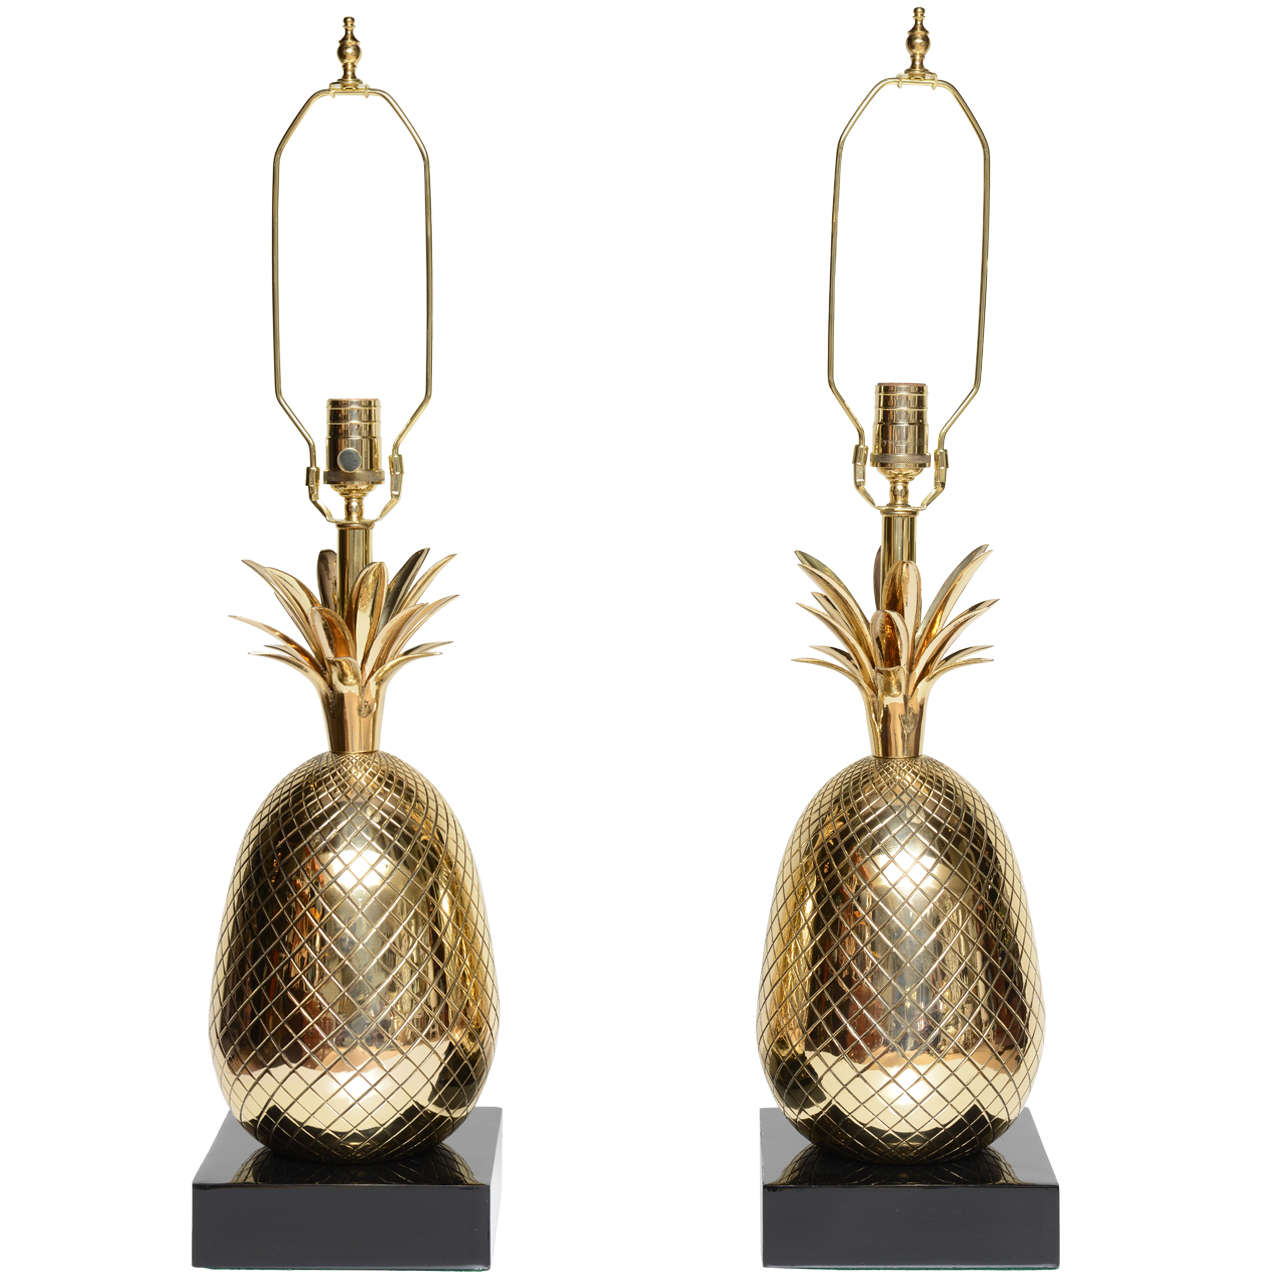 Pair of Polished Brass Pineapple Table Lamps